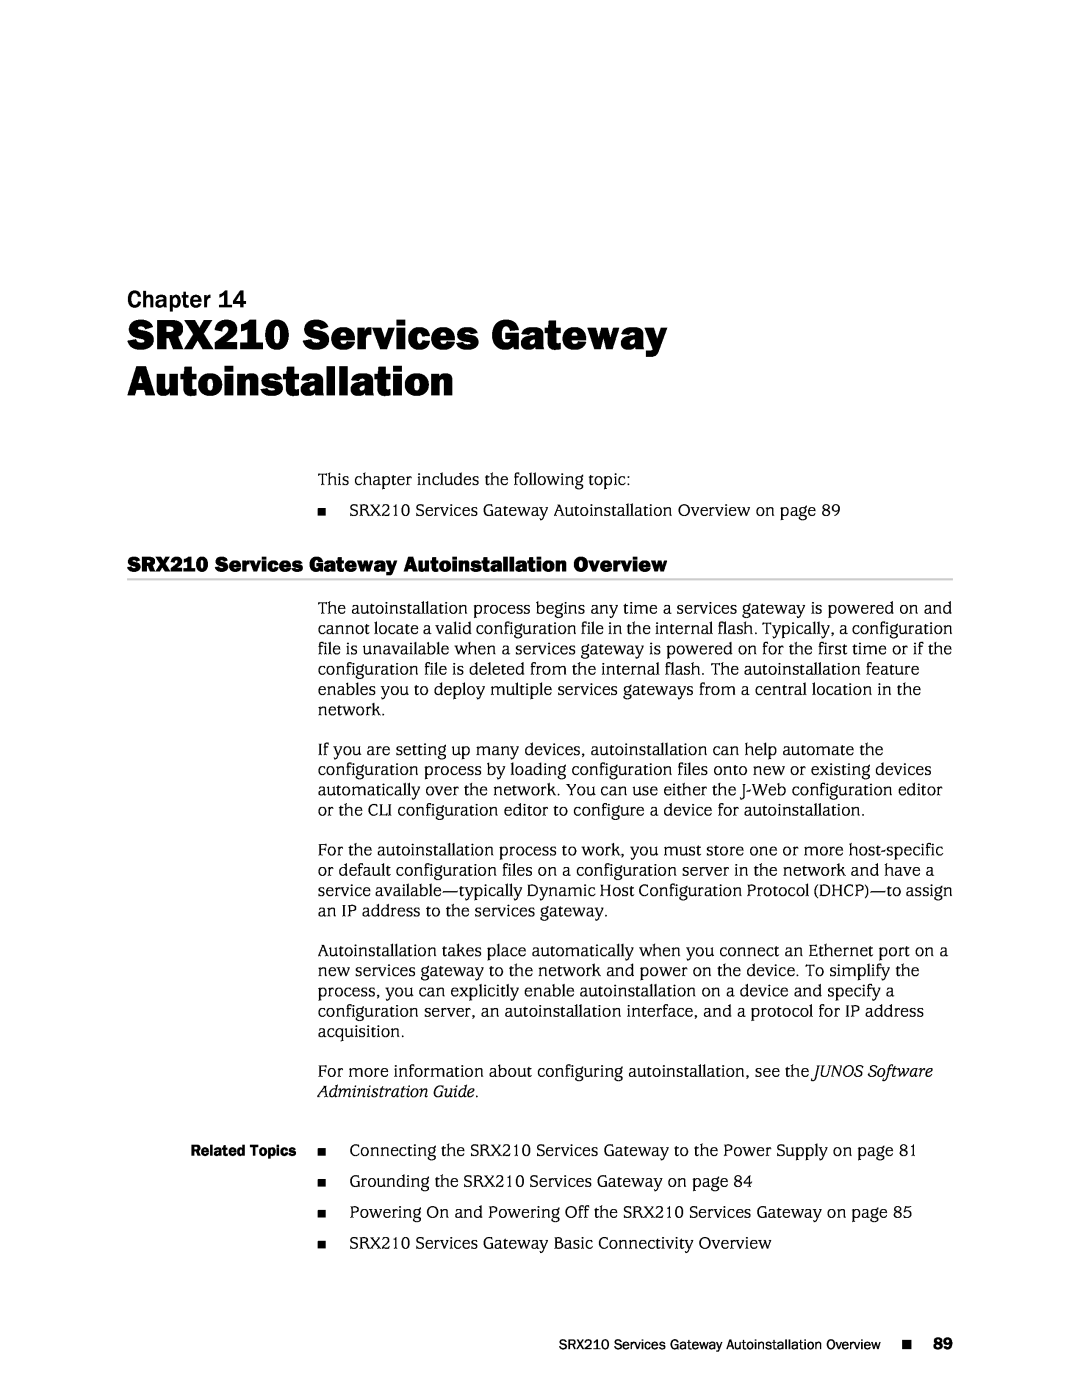 Juniper Networks SRX 210 manual SRX210 Services Gateway Autoinstallation Overview, Administration Guide, Chapter 